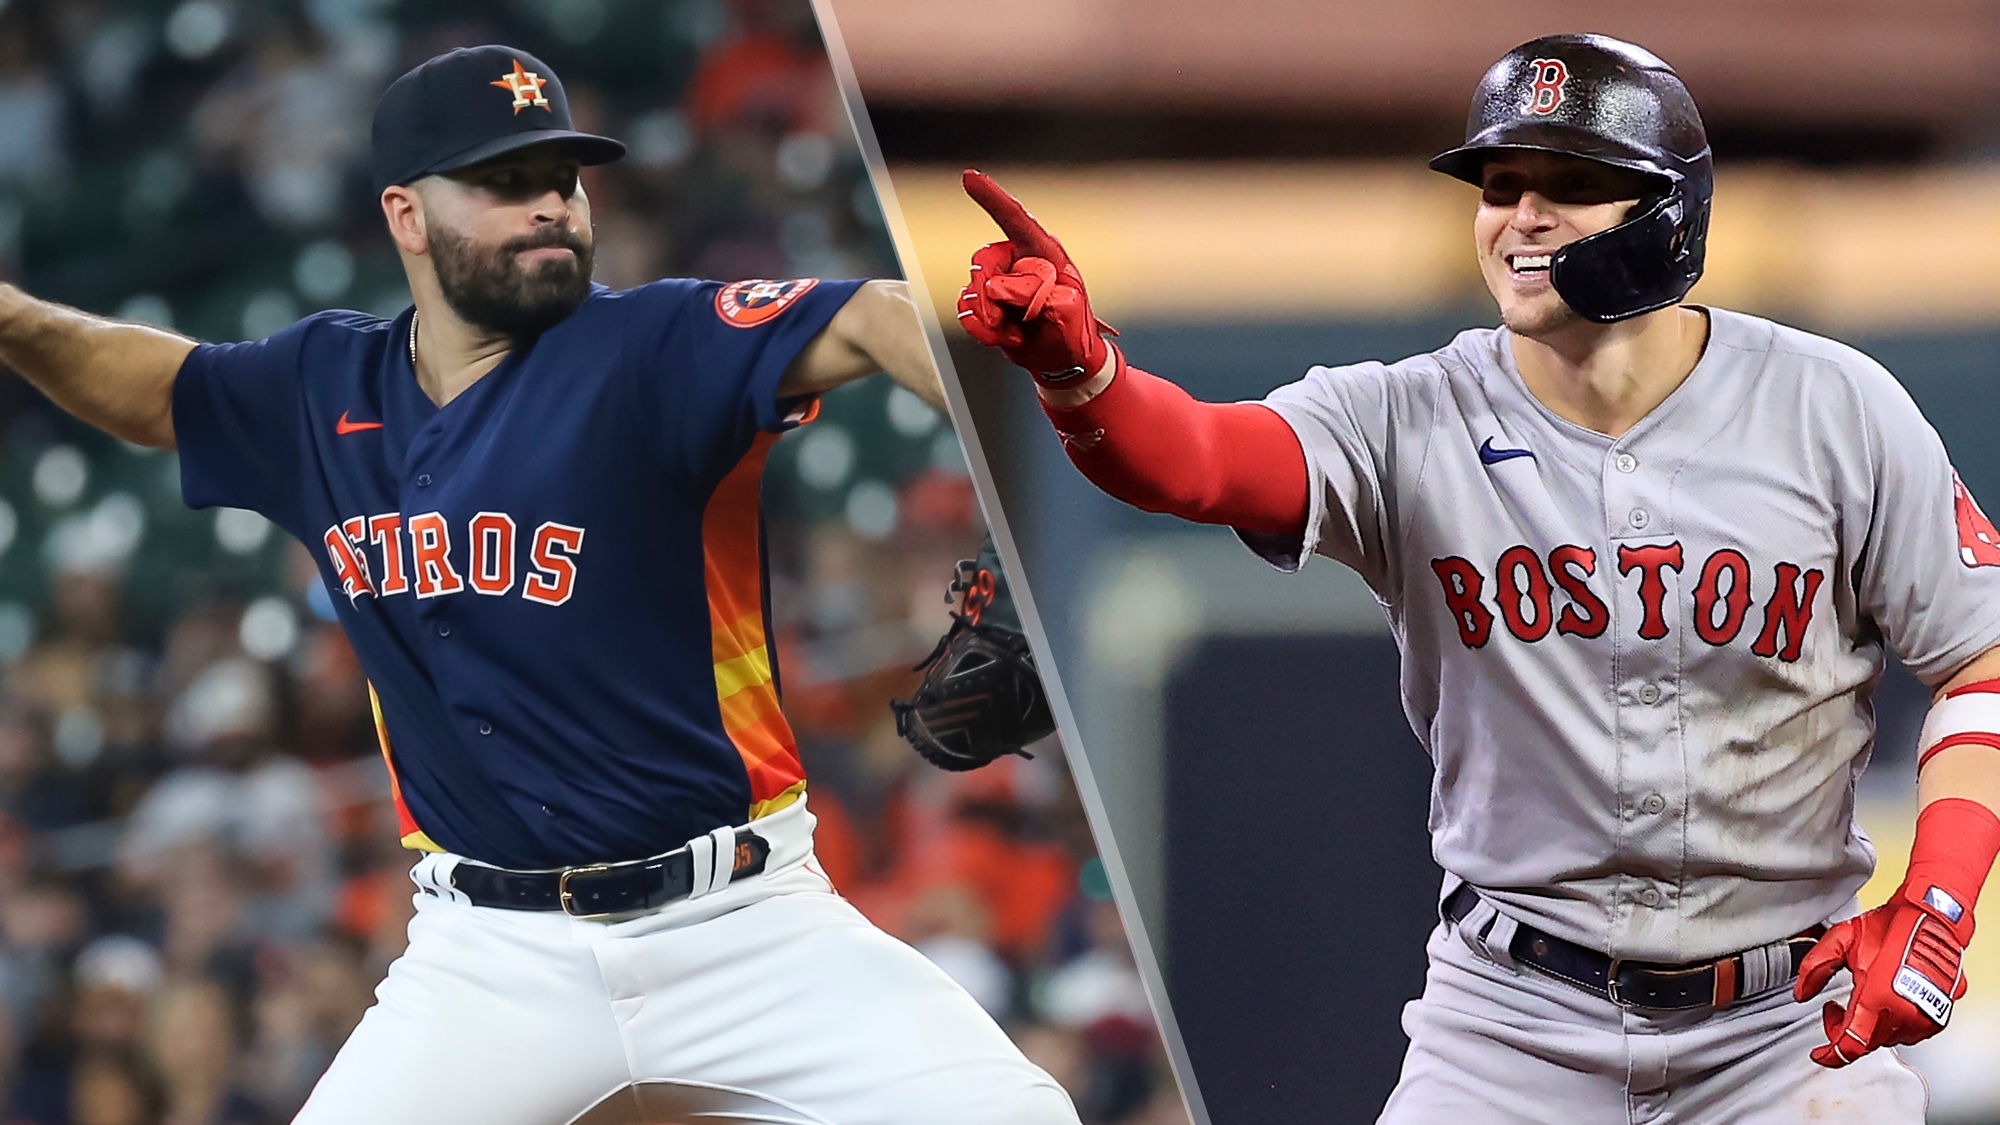 Astros vs Red Sox live stream is here How to watch ALCS Game 3 online